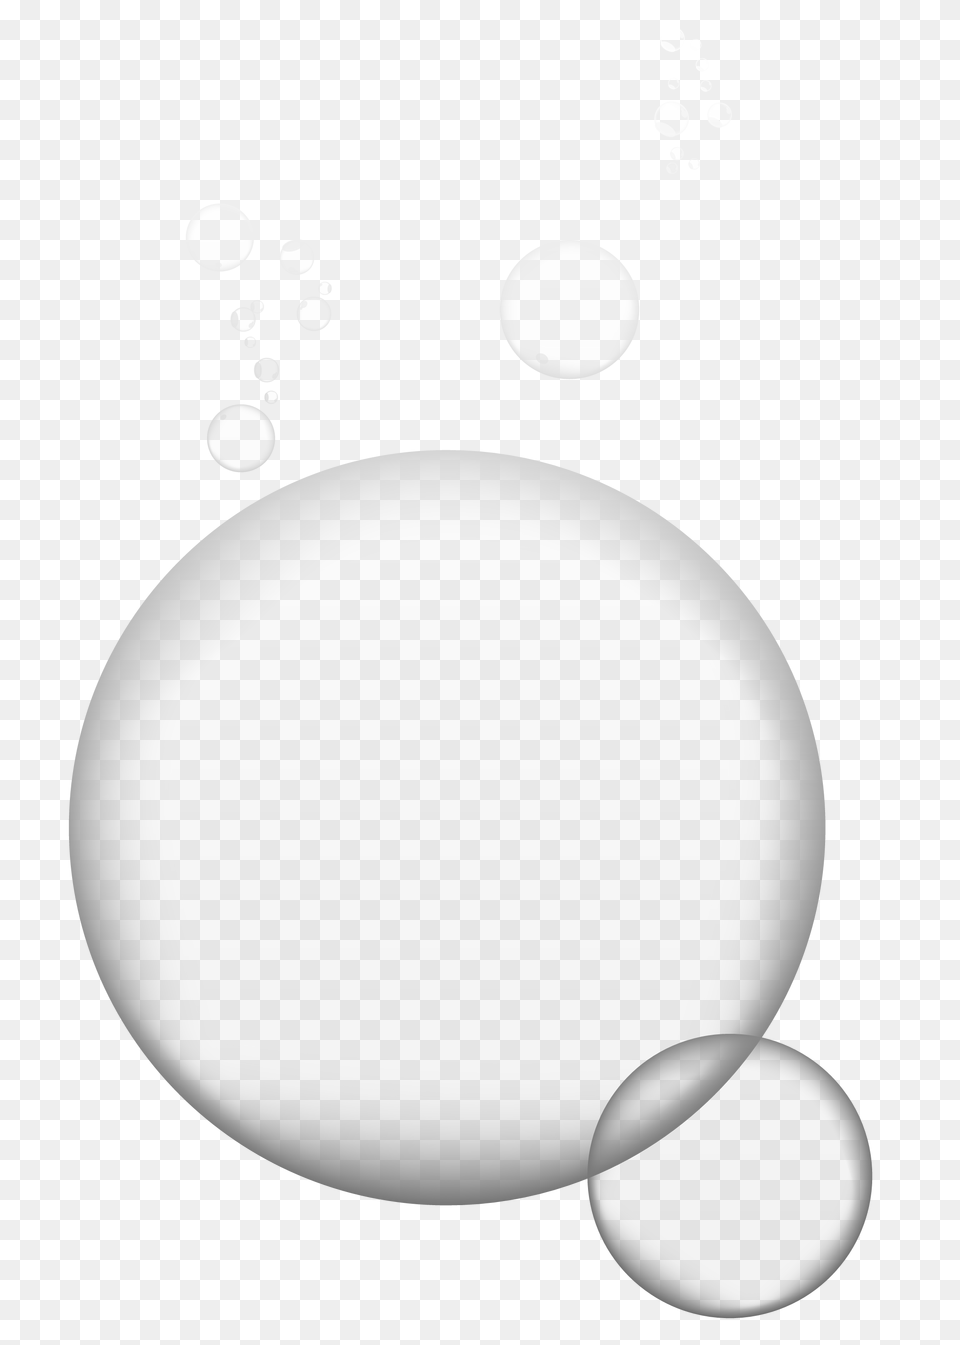 Pngpix Com Bubbles Transparent, Nature, Outdoors, Weather, First Aid Free Png